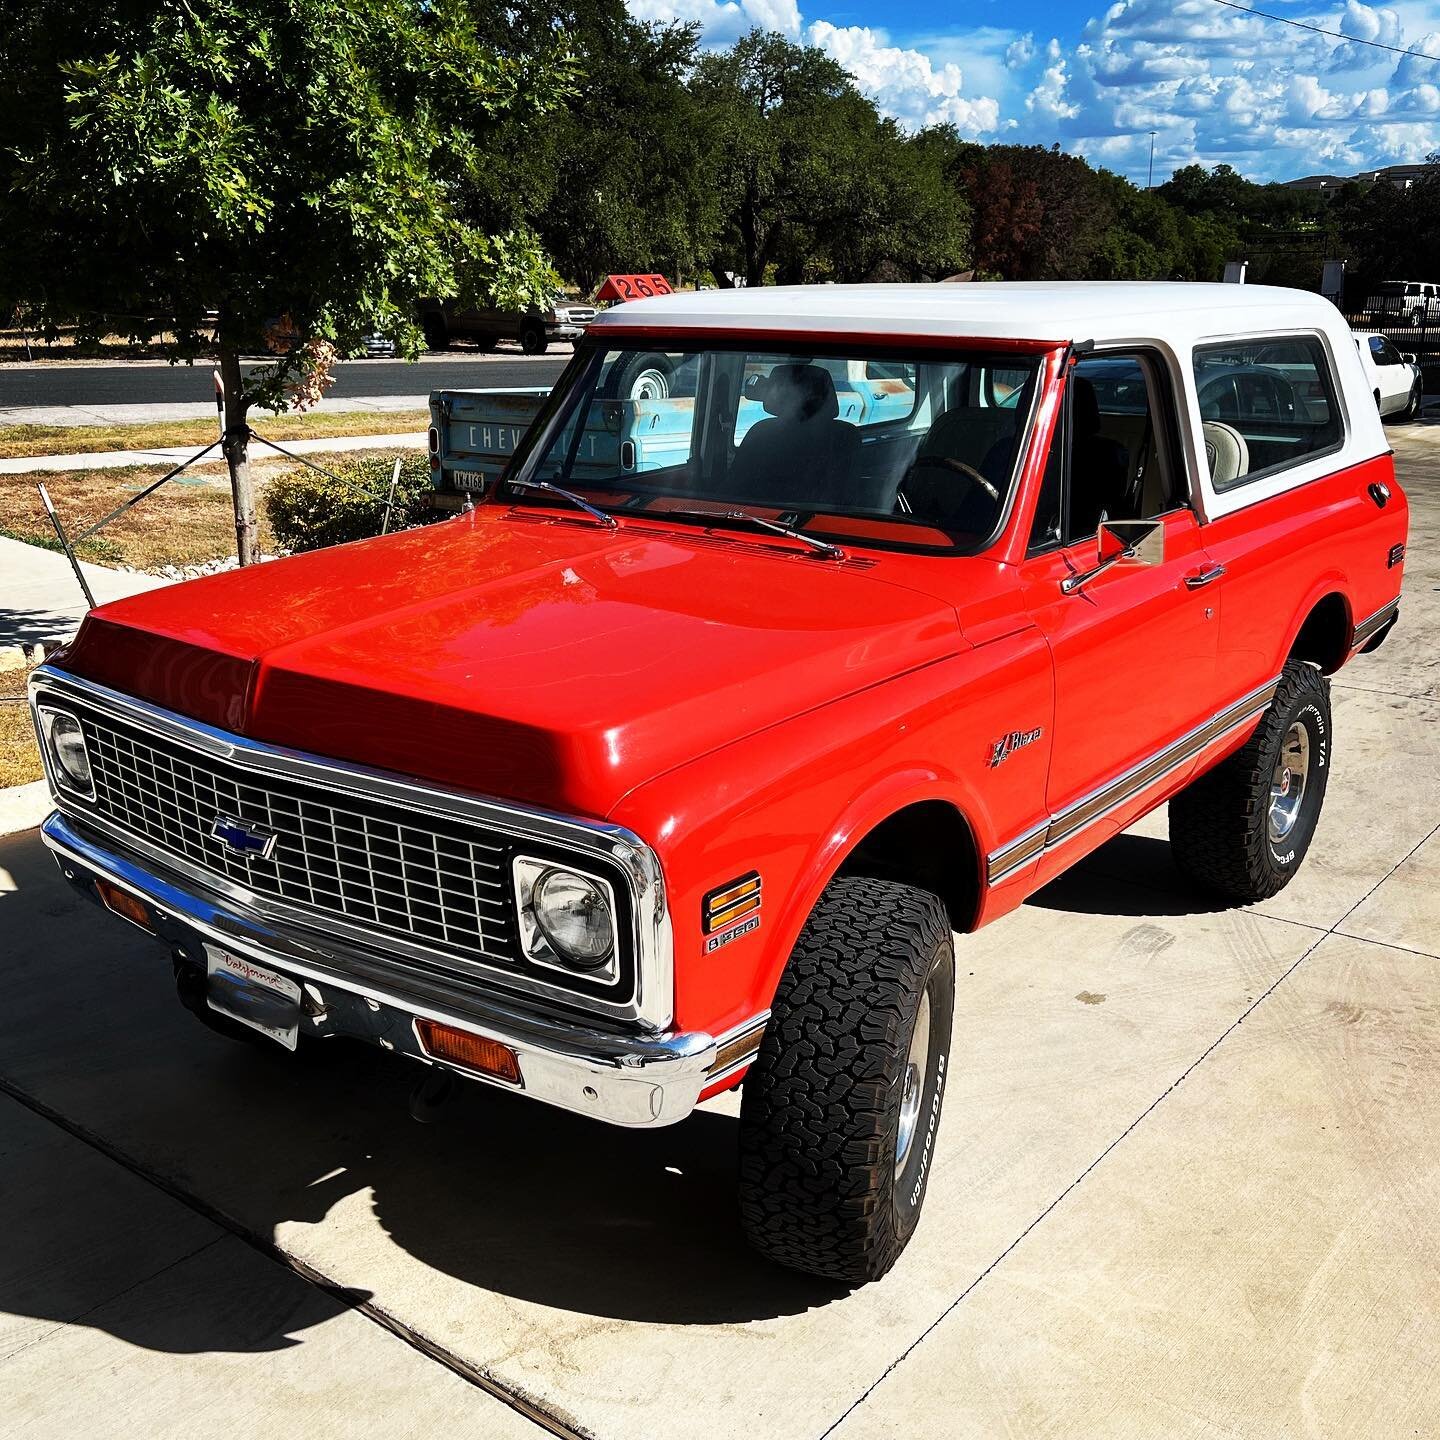 Blazin&rsquo; into the weekend with this new arrival at the shop! Stay tuned for a very exciting AWD solution for this beast #chevy #chevy #classicchevy #chevytrucks #classicchevytrucks #chevyblazer #k5blazer #MomentBlazer #MomentK5 #classicev #elect